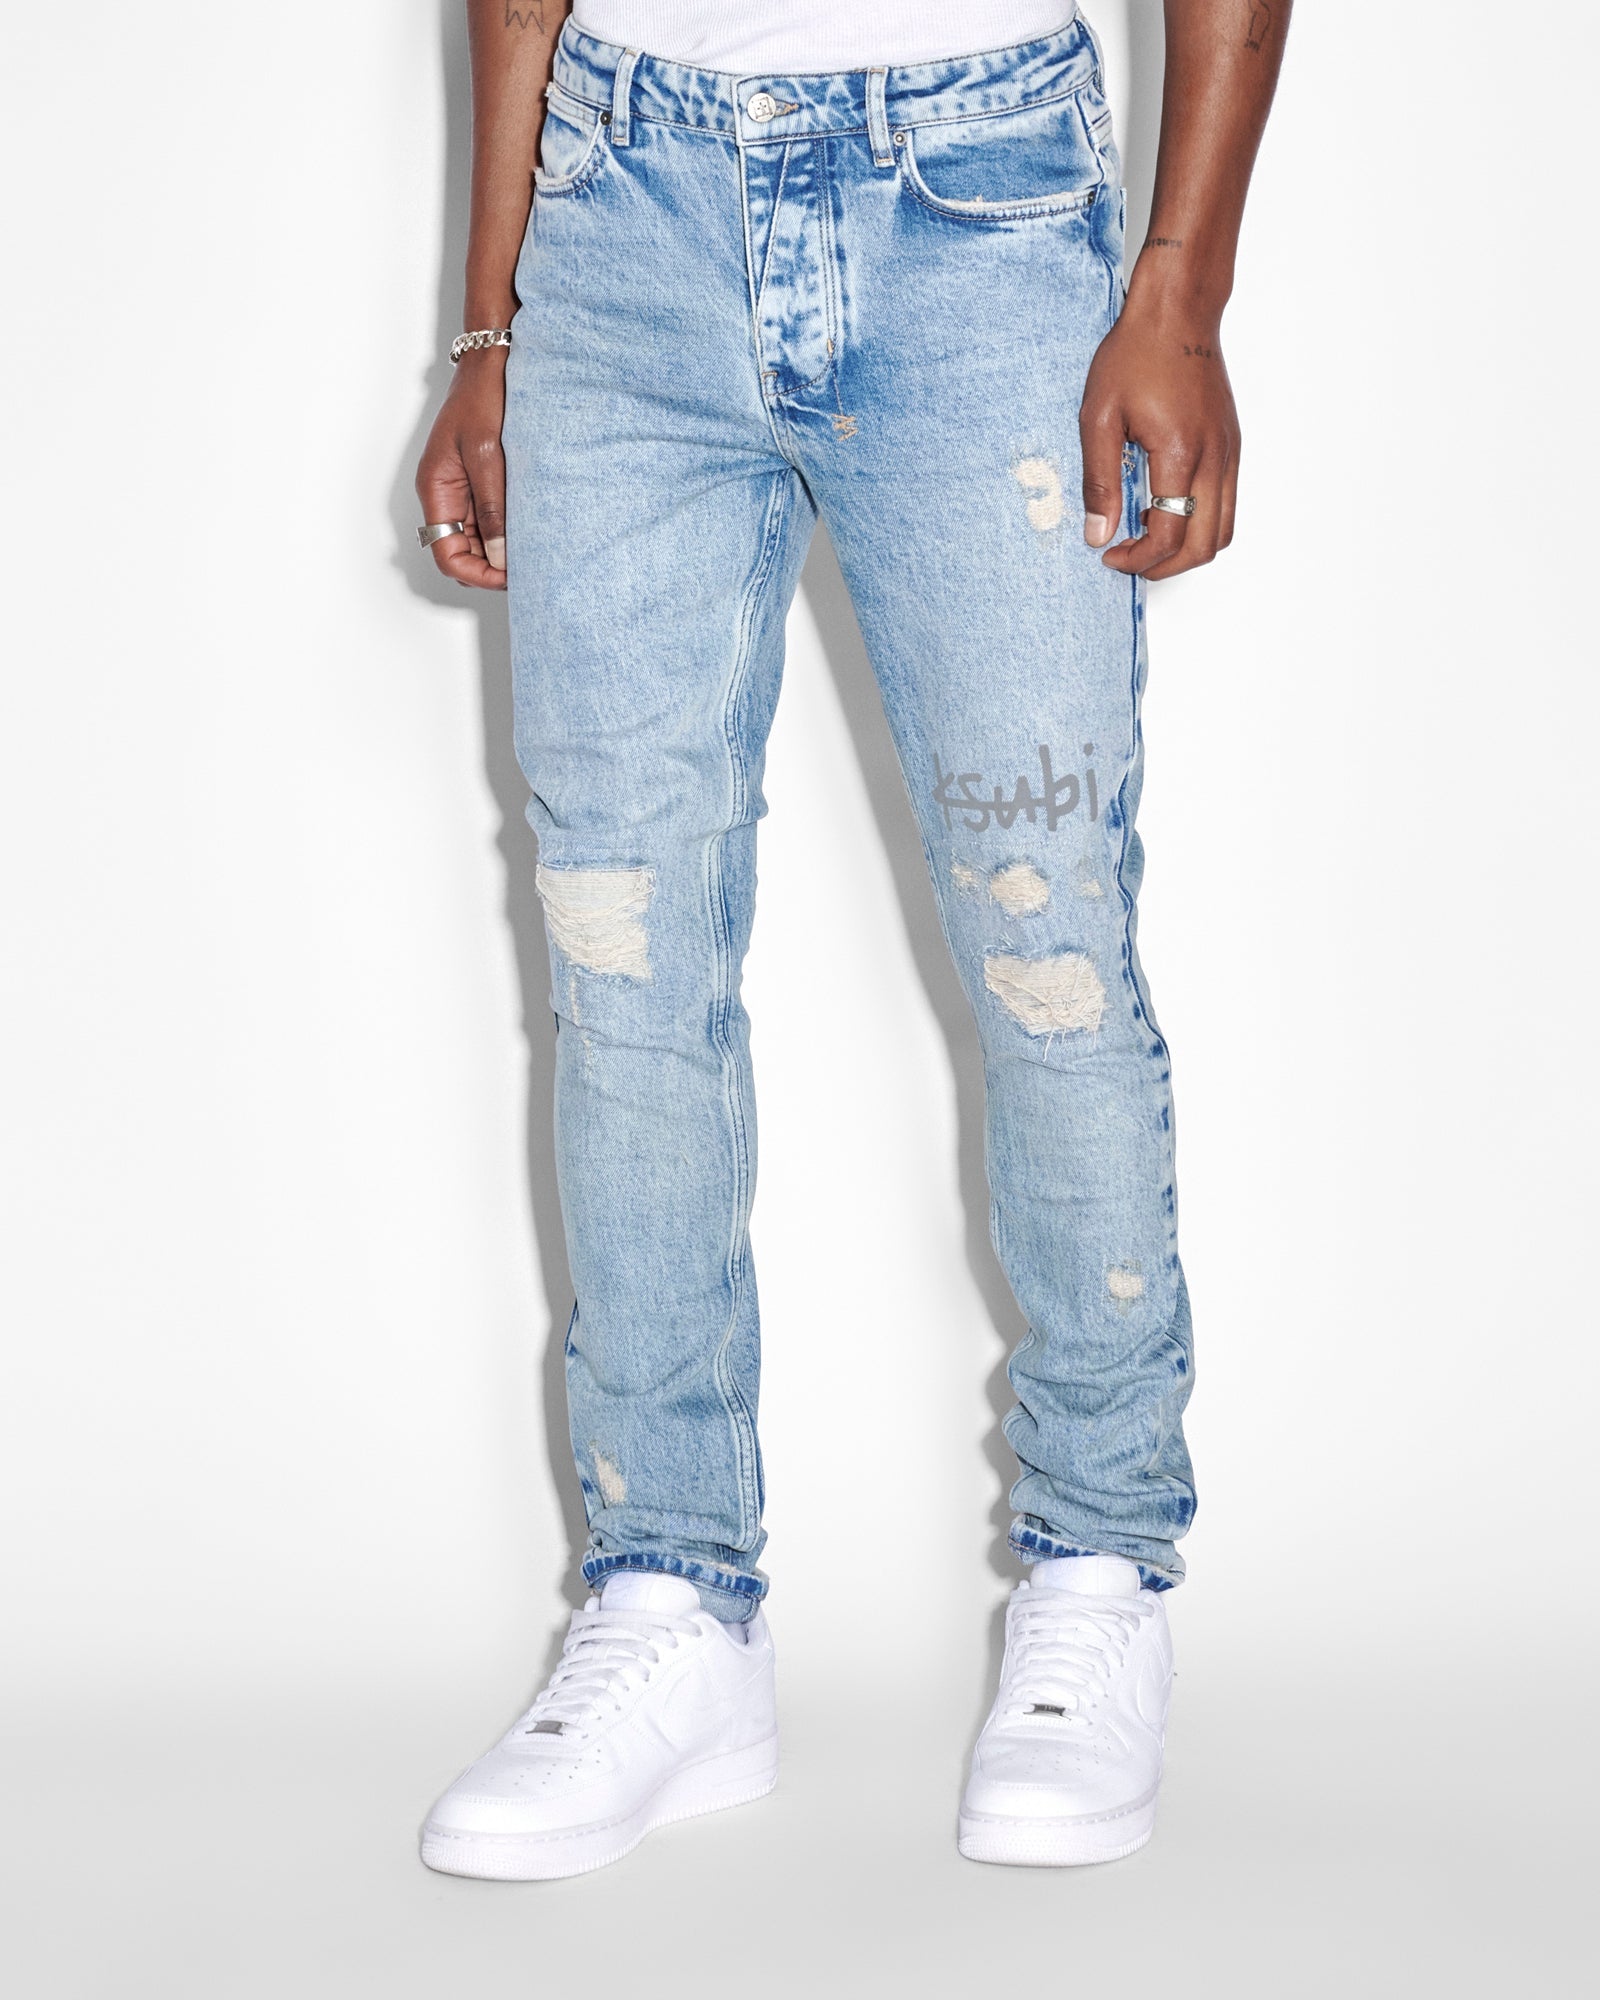 Stylish Ripped Jeans for Men - Shop Now!